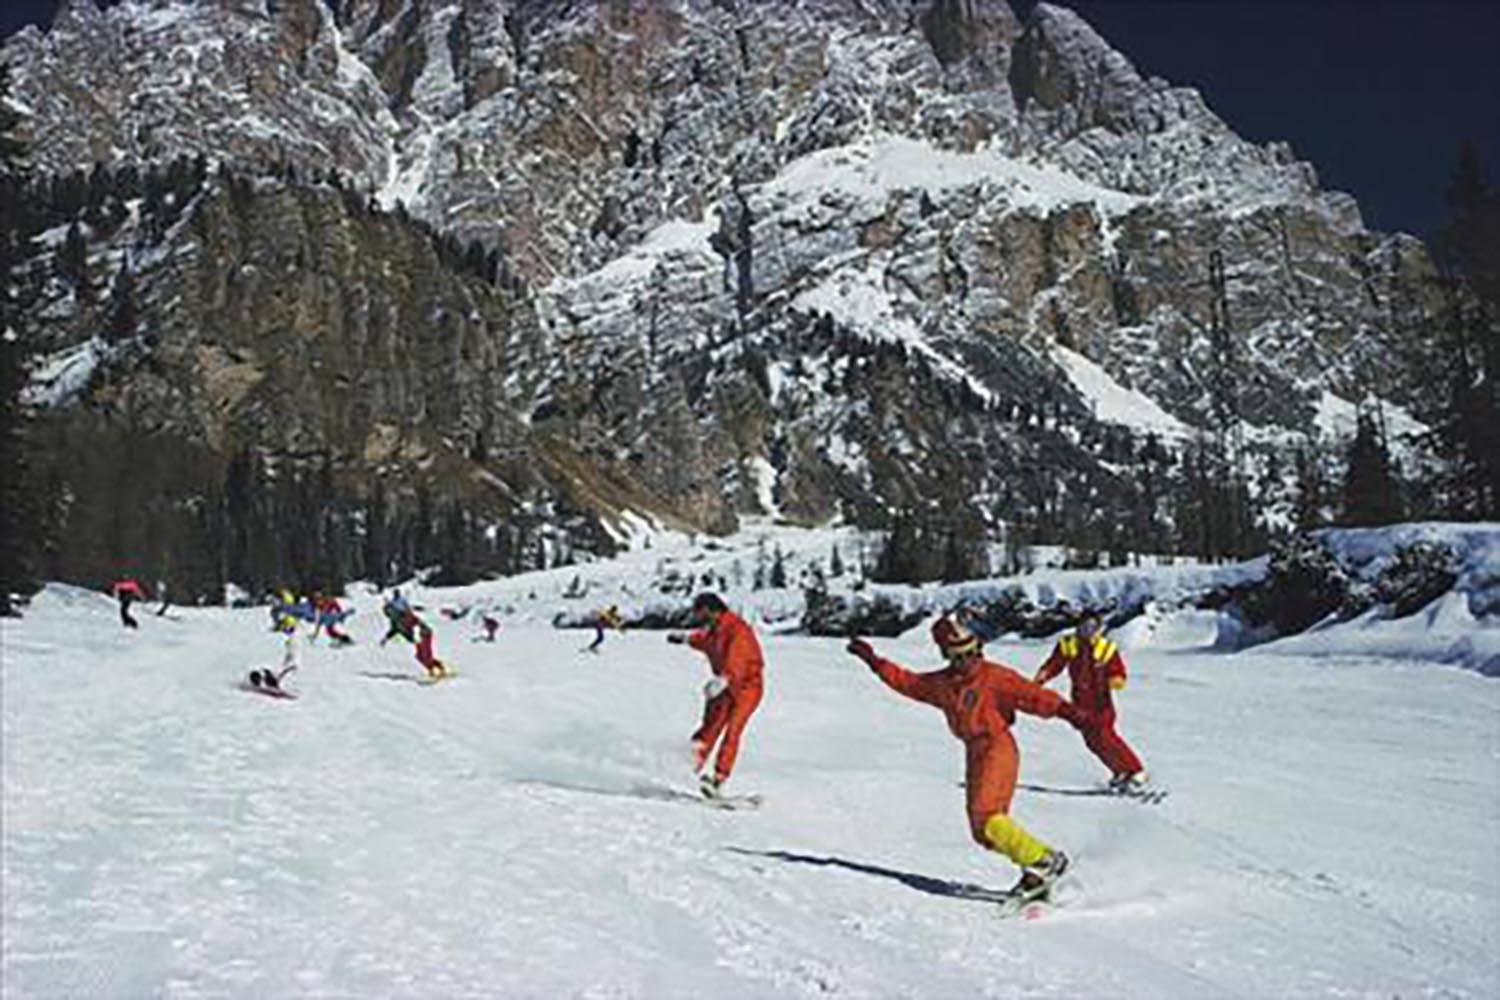 Two women, wearing brightly-coloured skiwear, stand in the foreground of a group of people attending a party in Snowmass Village, in Pitkin County, Colorado, in April 1968. 

40 x 60 inches
$3950

30 x 40 inches
$3350

20 x 30